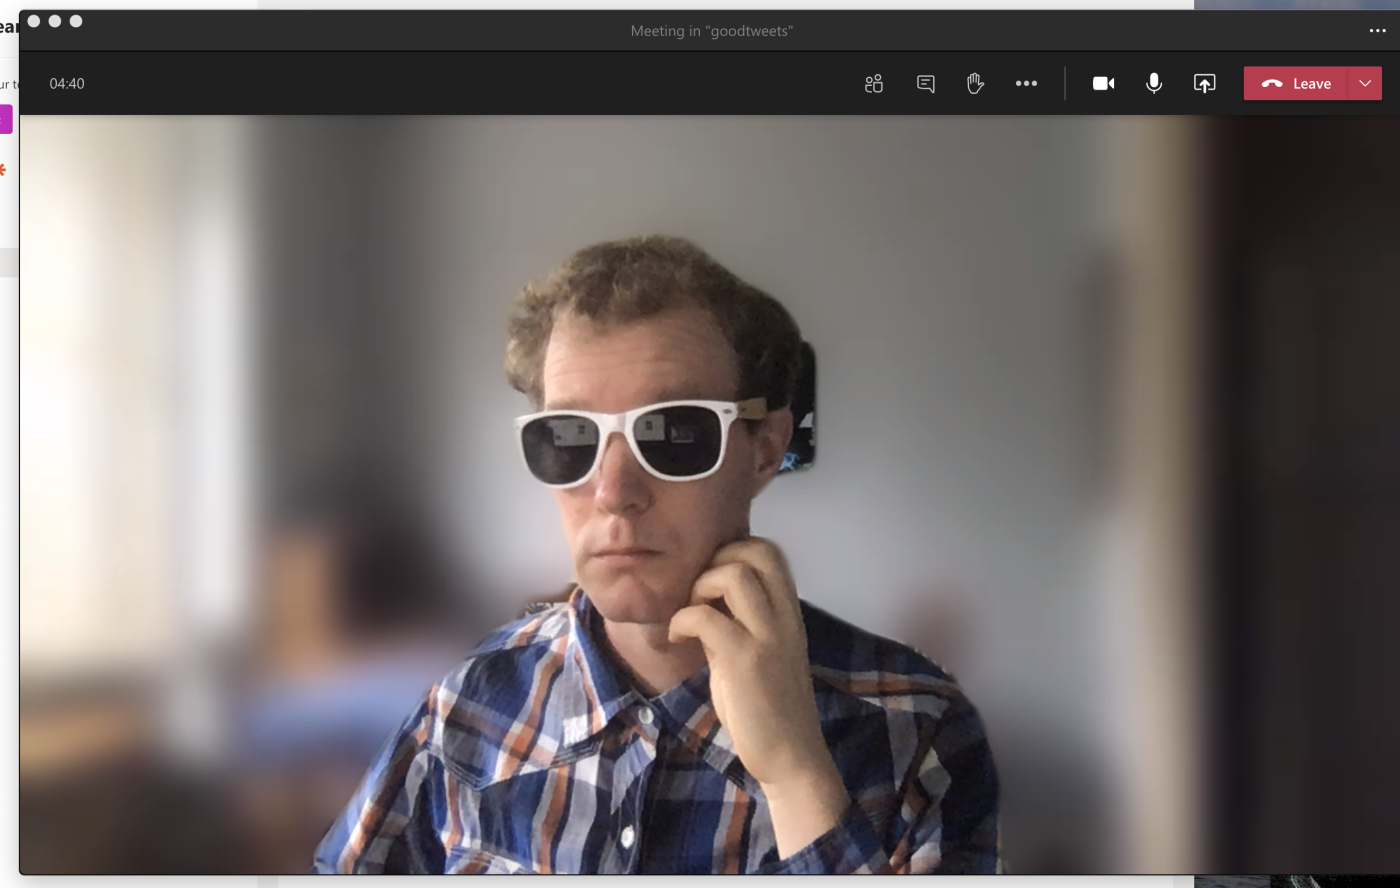 Blurred background in Microsoft Teams